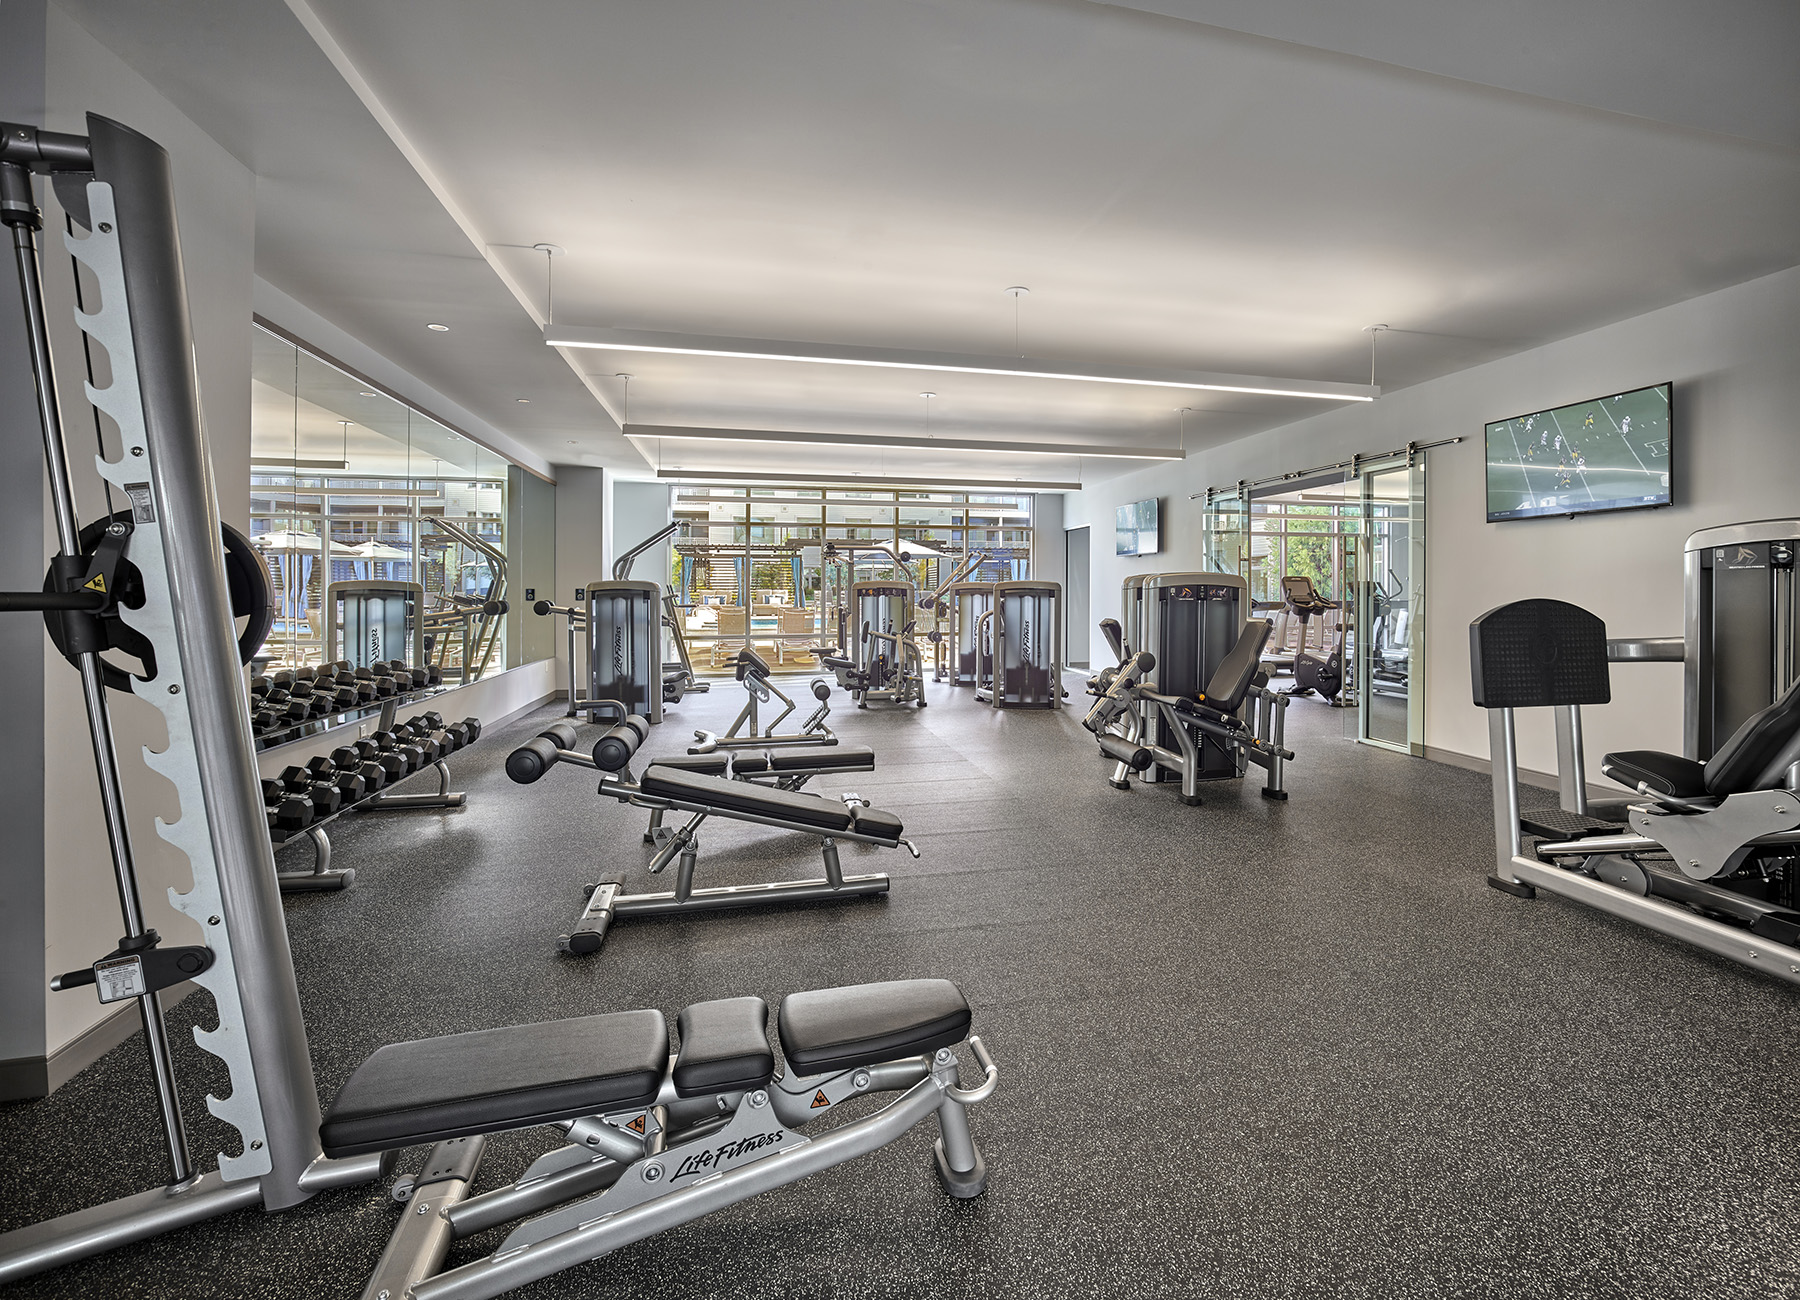 AVE Florham Park apartment community fitness center with large windows and strength equipment